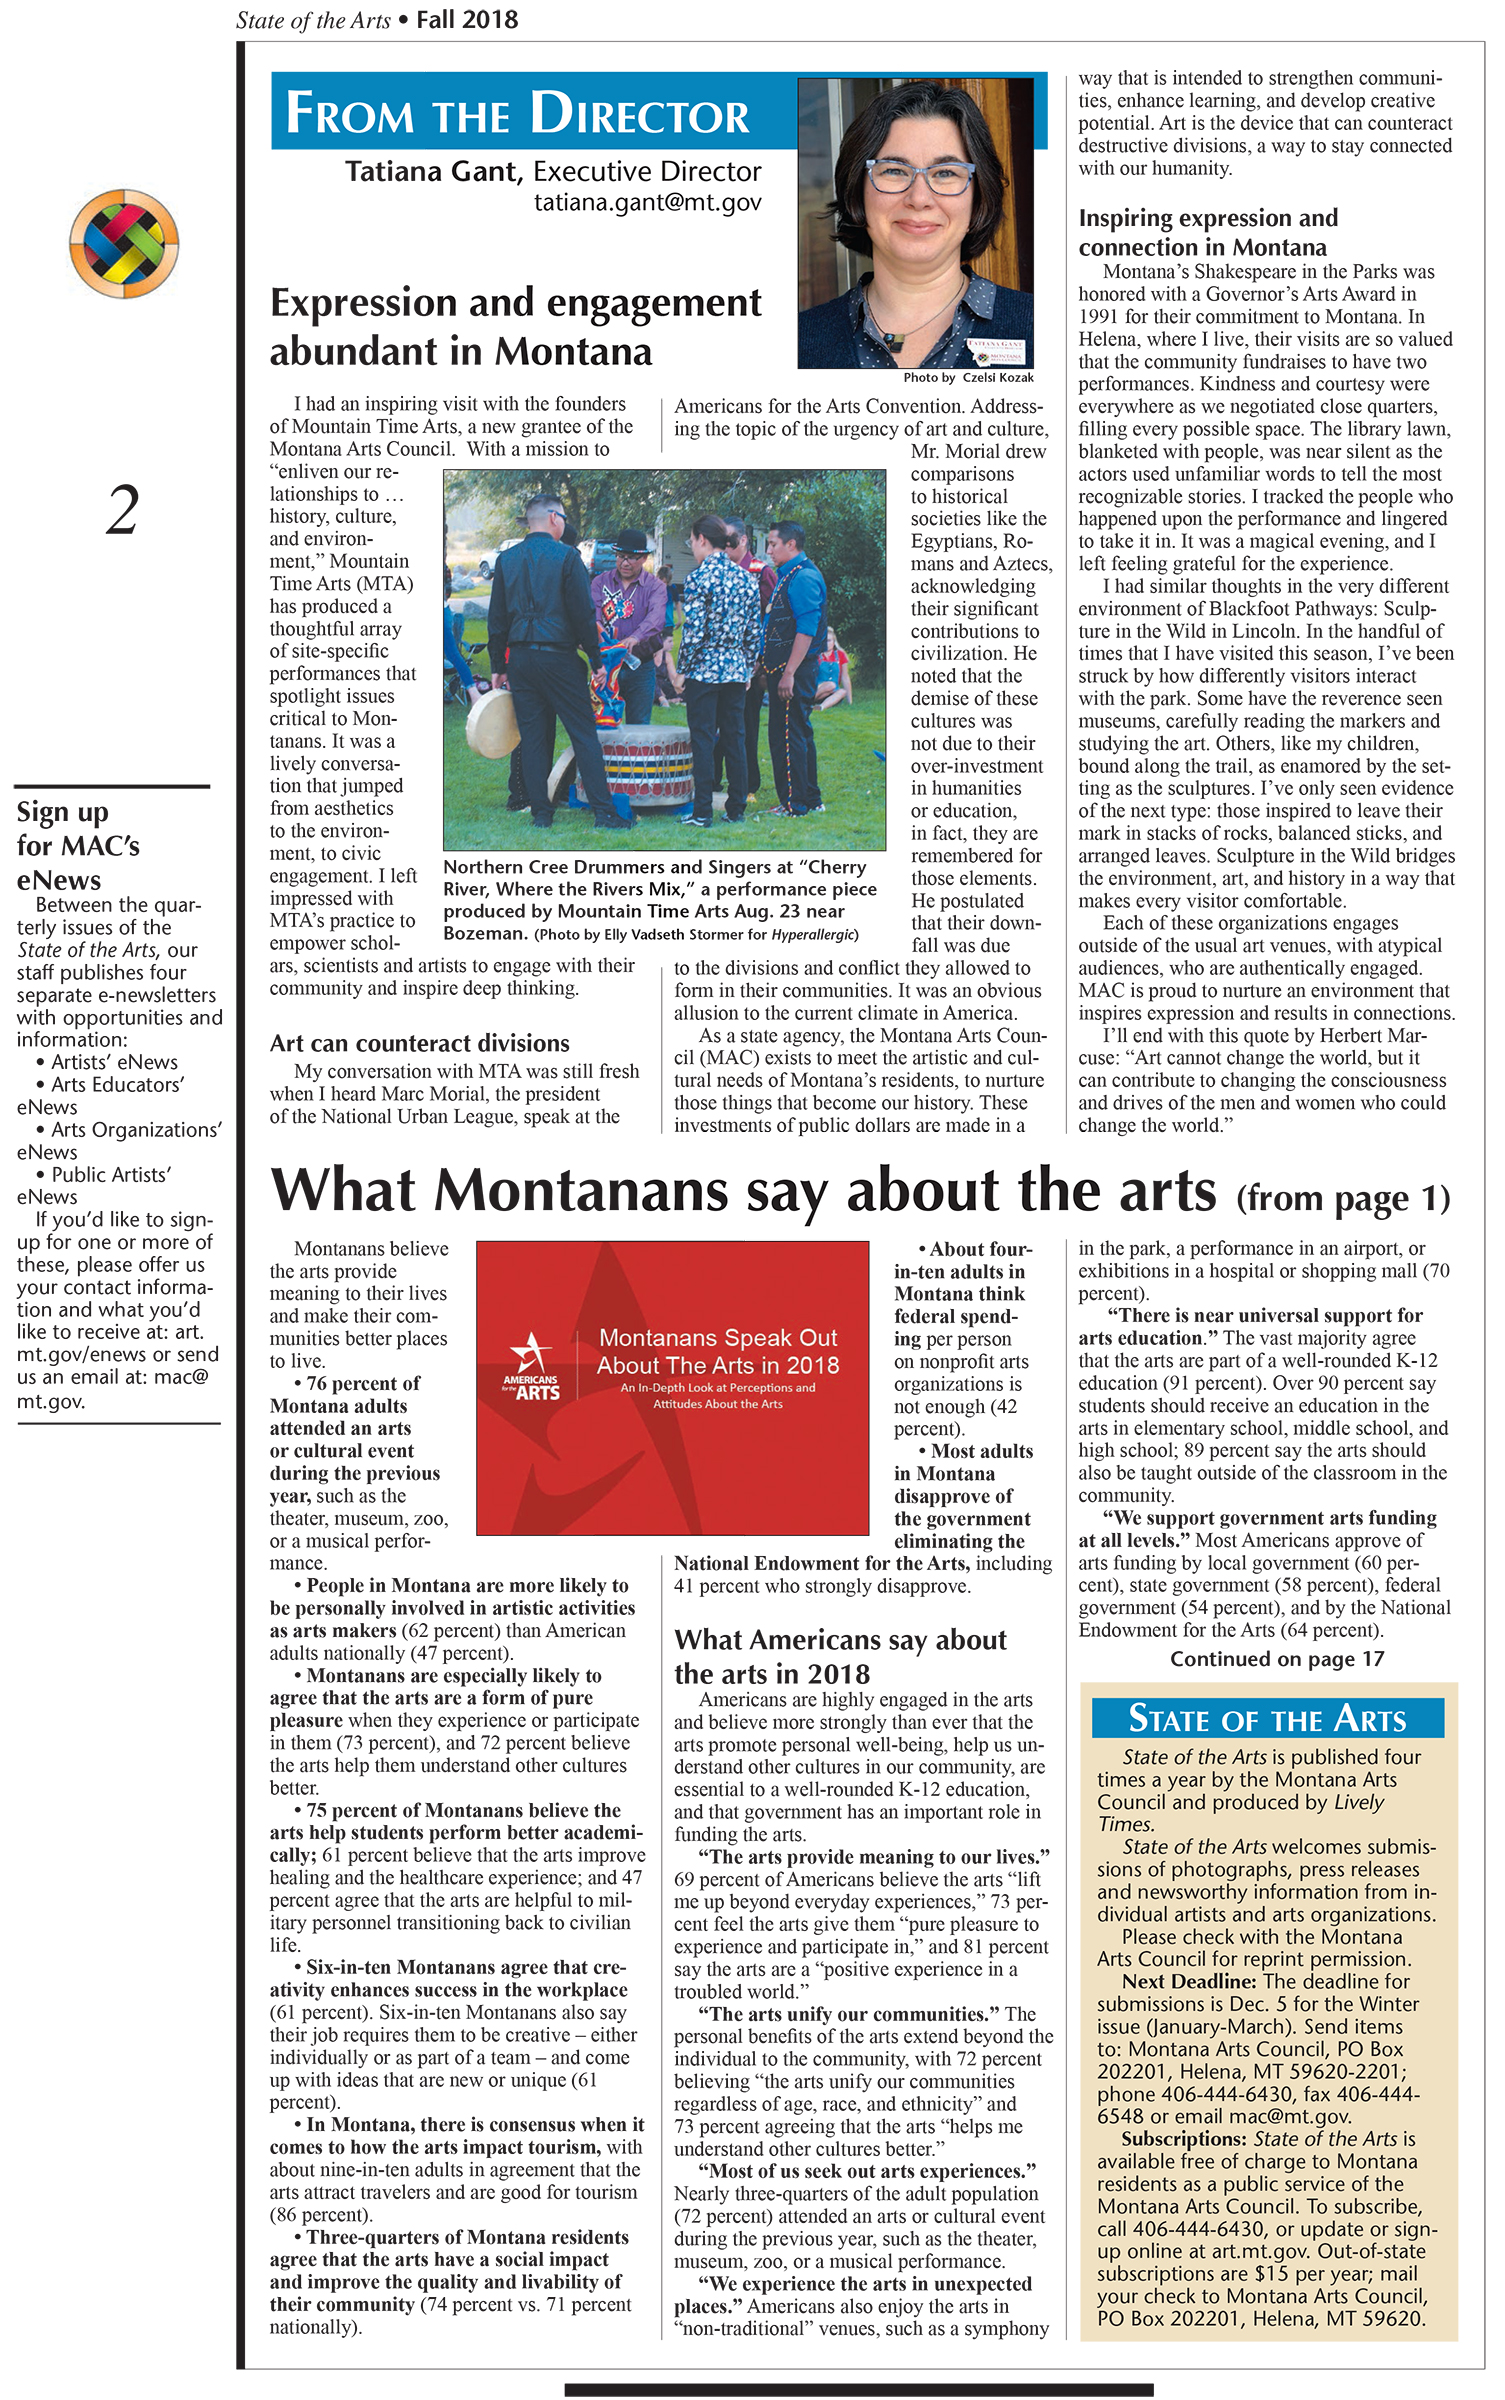 Montana Arts Council, State of the Arts, Fall 2018